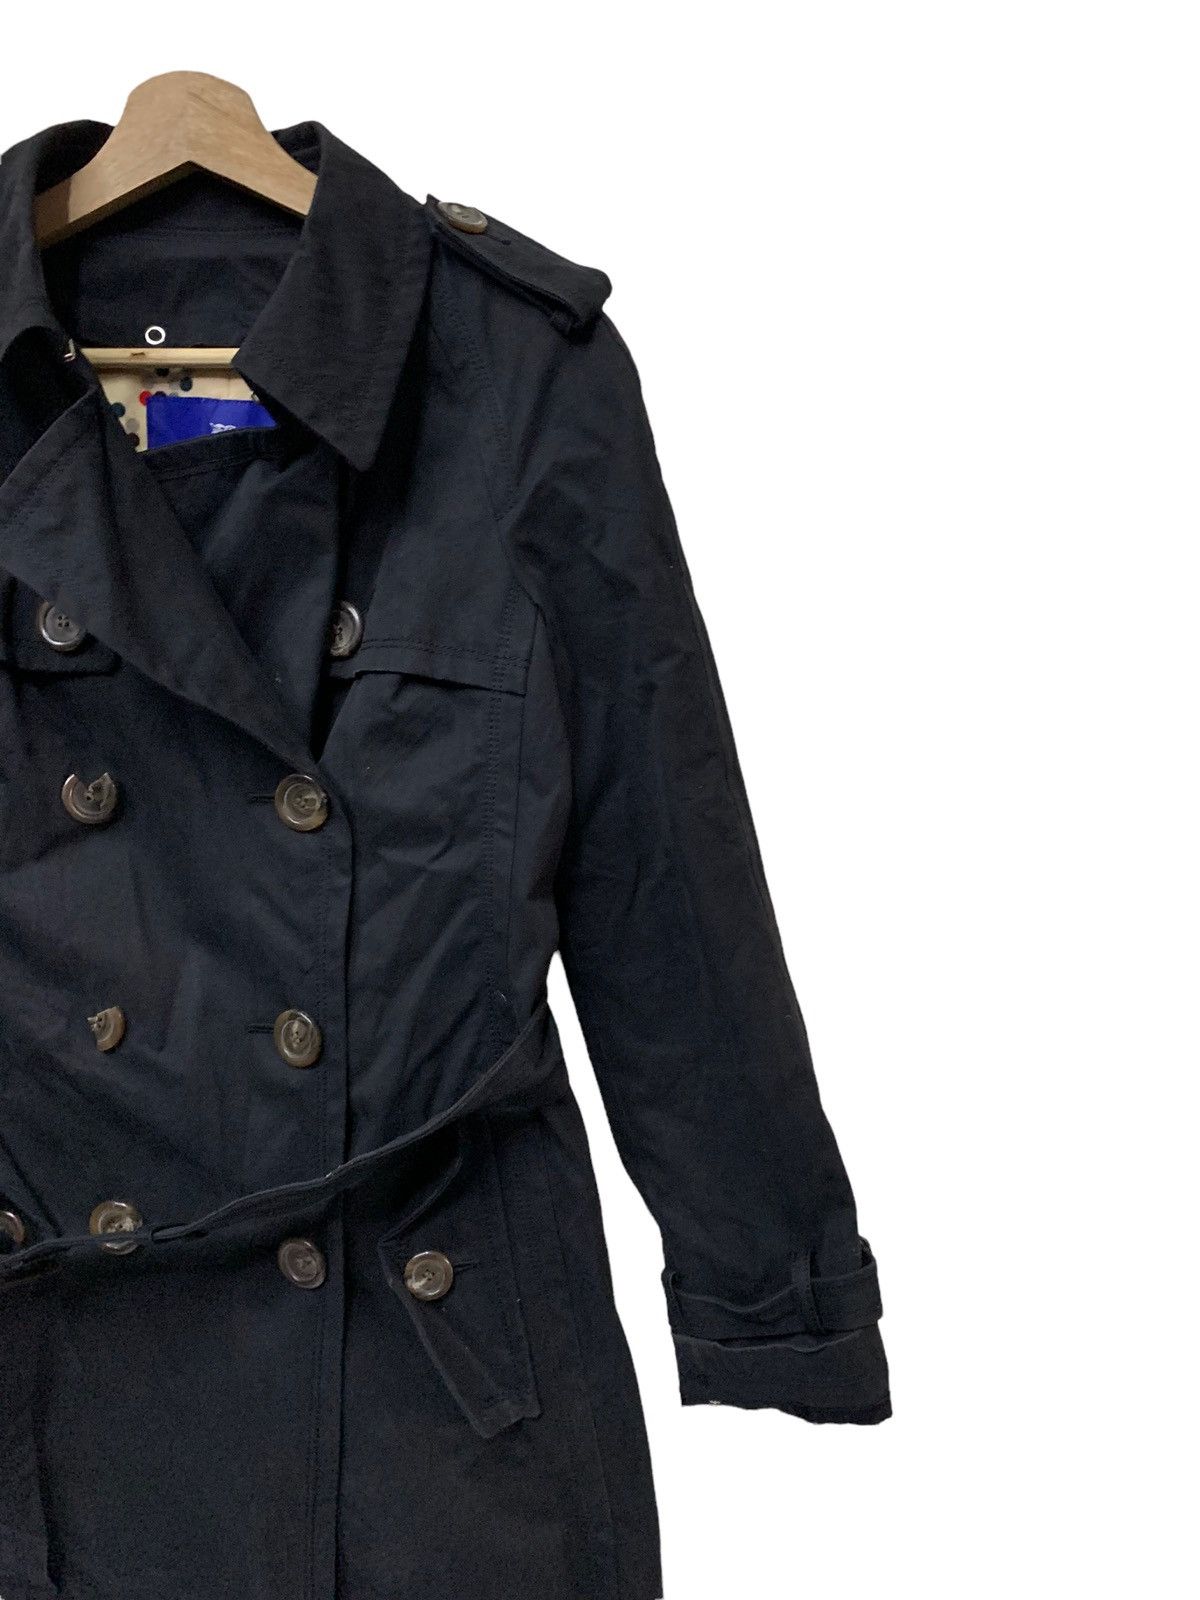 🔥BURBERRY BLUE LABEL WOOL CHERRY LINED TRENCH COAT - 7